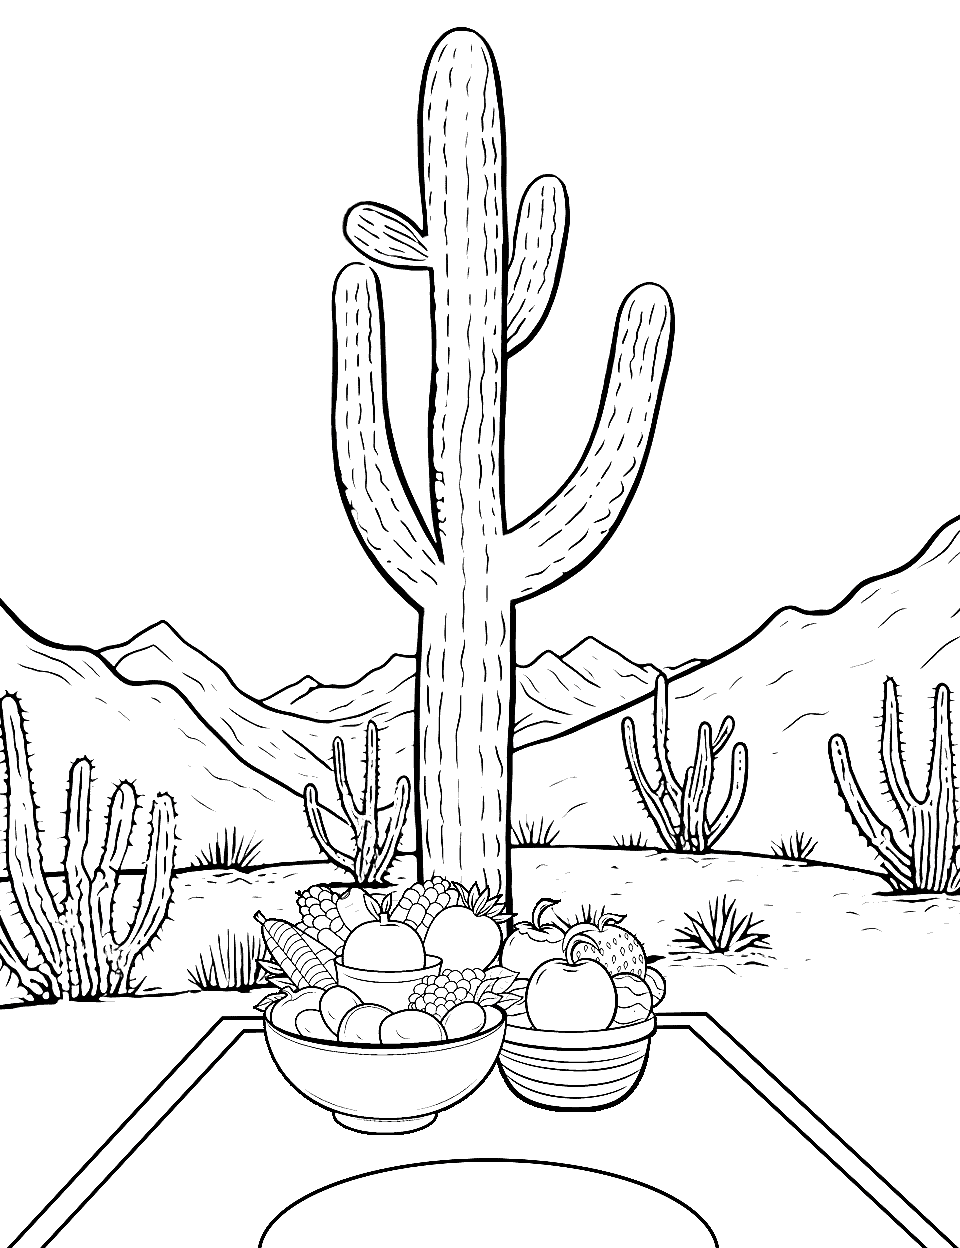 Picnic in the Desert Cactus Coloring Page - A picnic scene with a blanket and basket, set in a desert with cacti around.